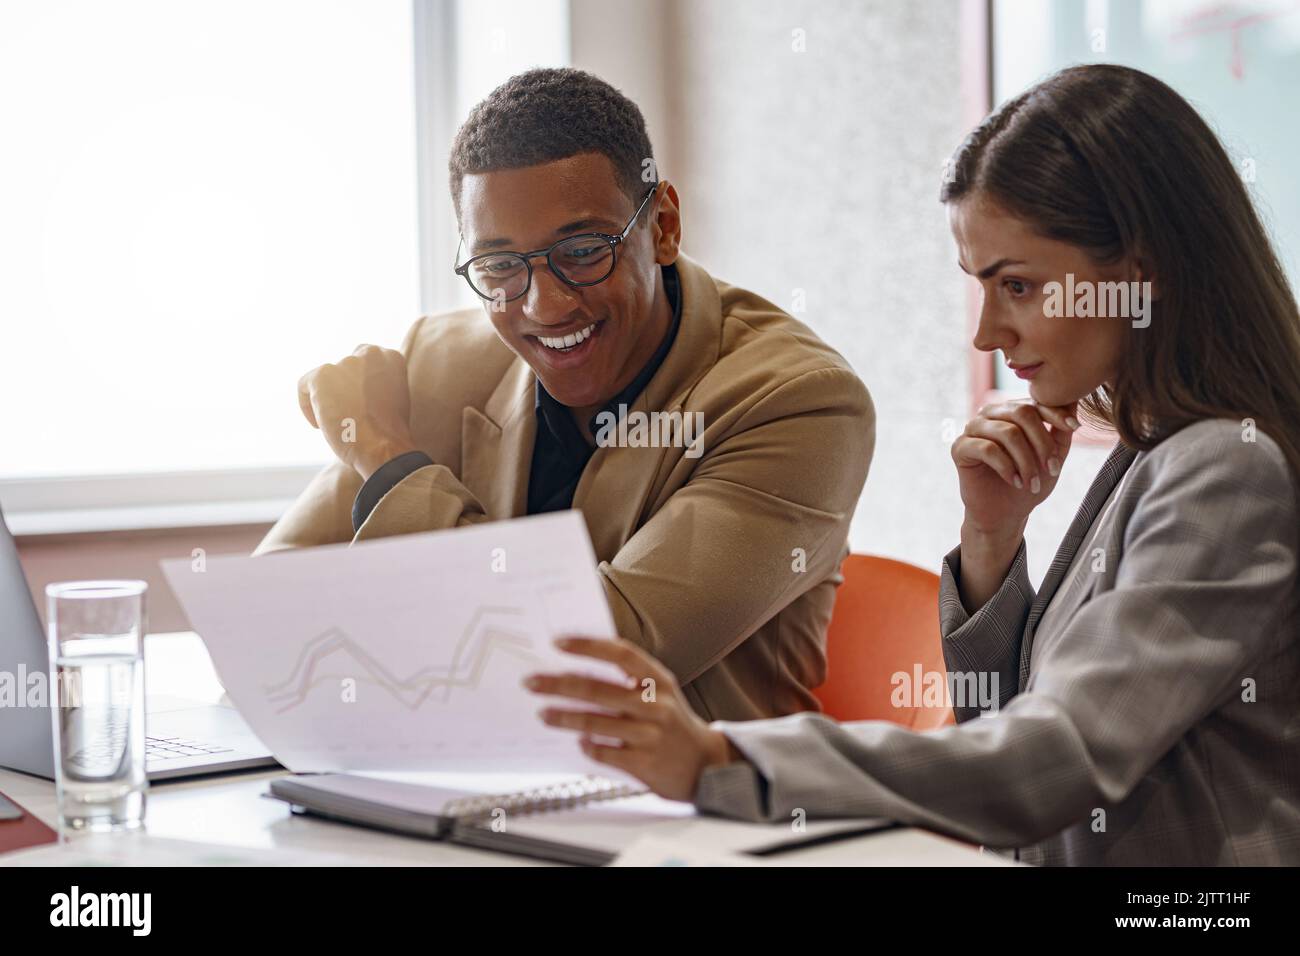 Smiling coworkers cooperating and working together at coworking space, teamwork concept Stock Photo